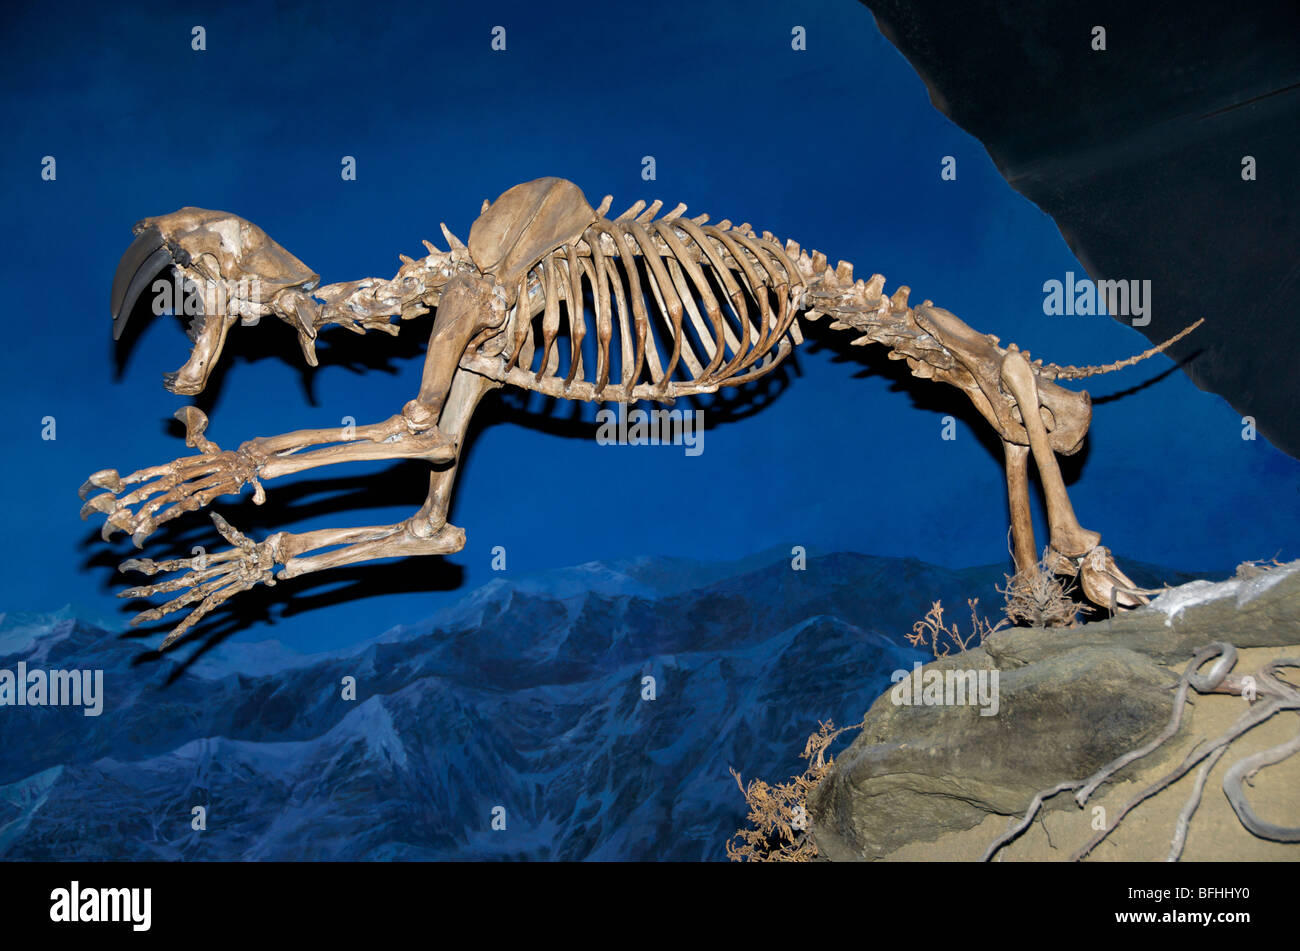 saber-toothed cat, sabertooth, and saber-toothed tiger describe numerous species,  Royal Tyrrell Museum, Alta, Canada. Stock Photo